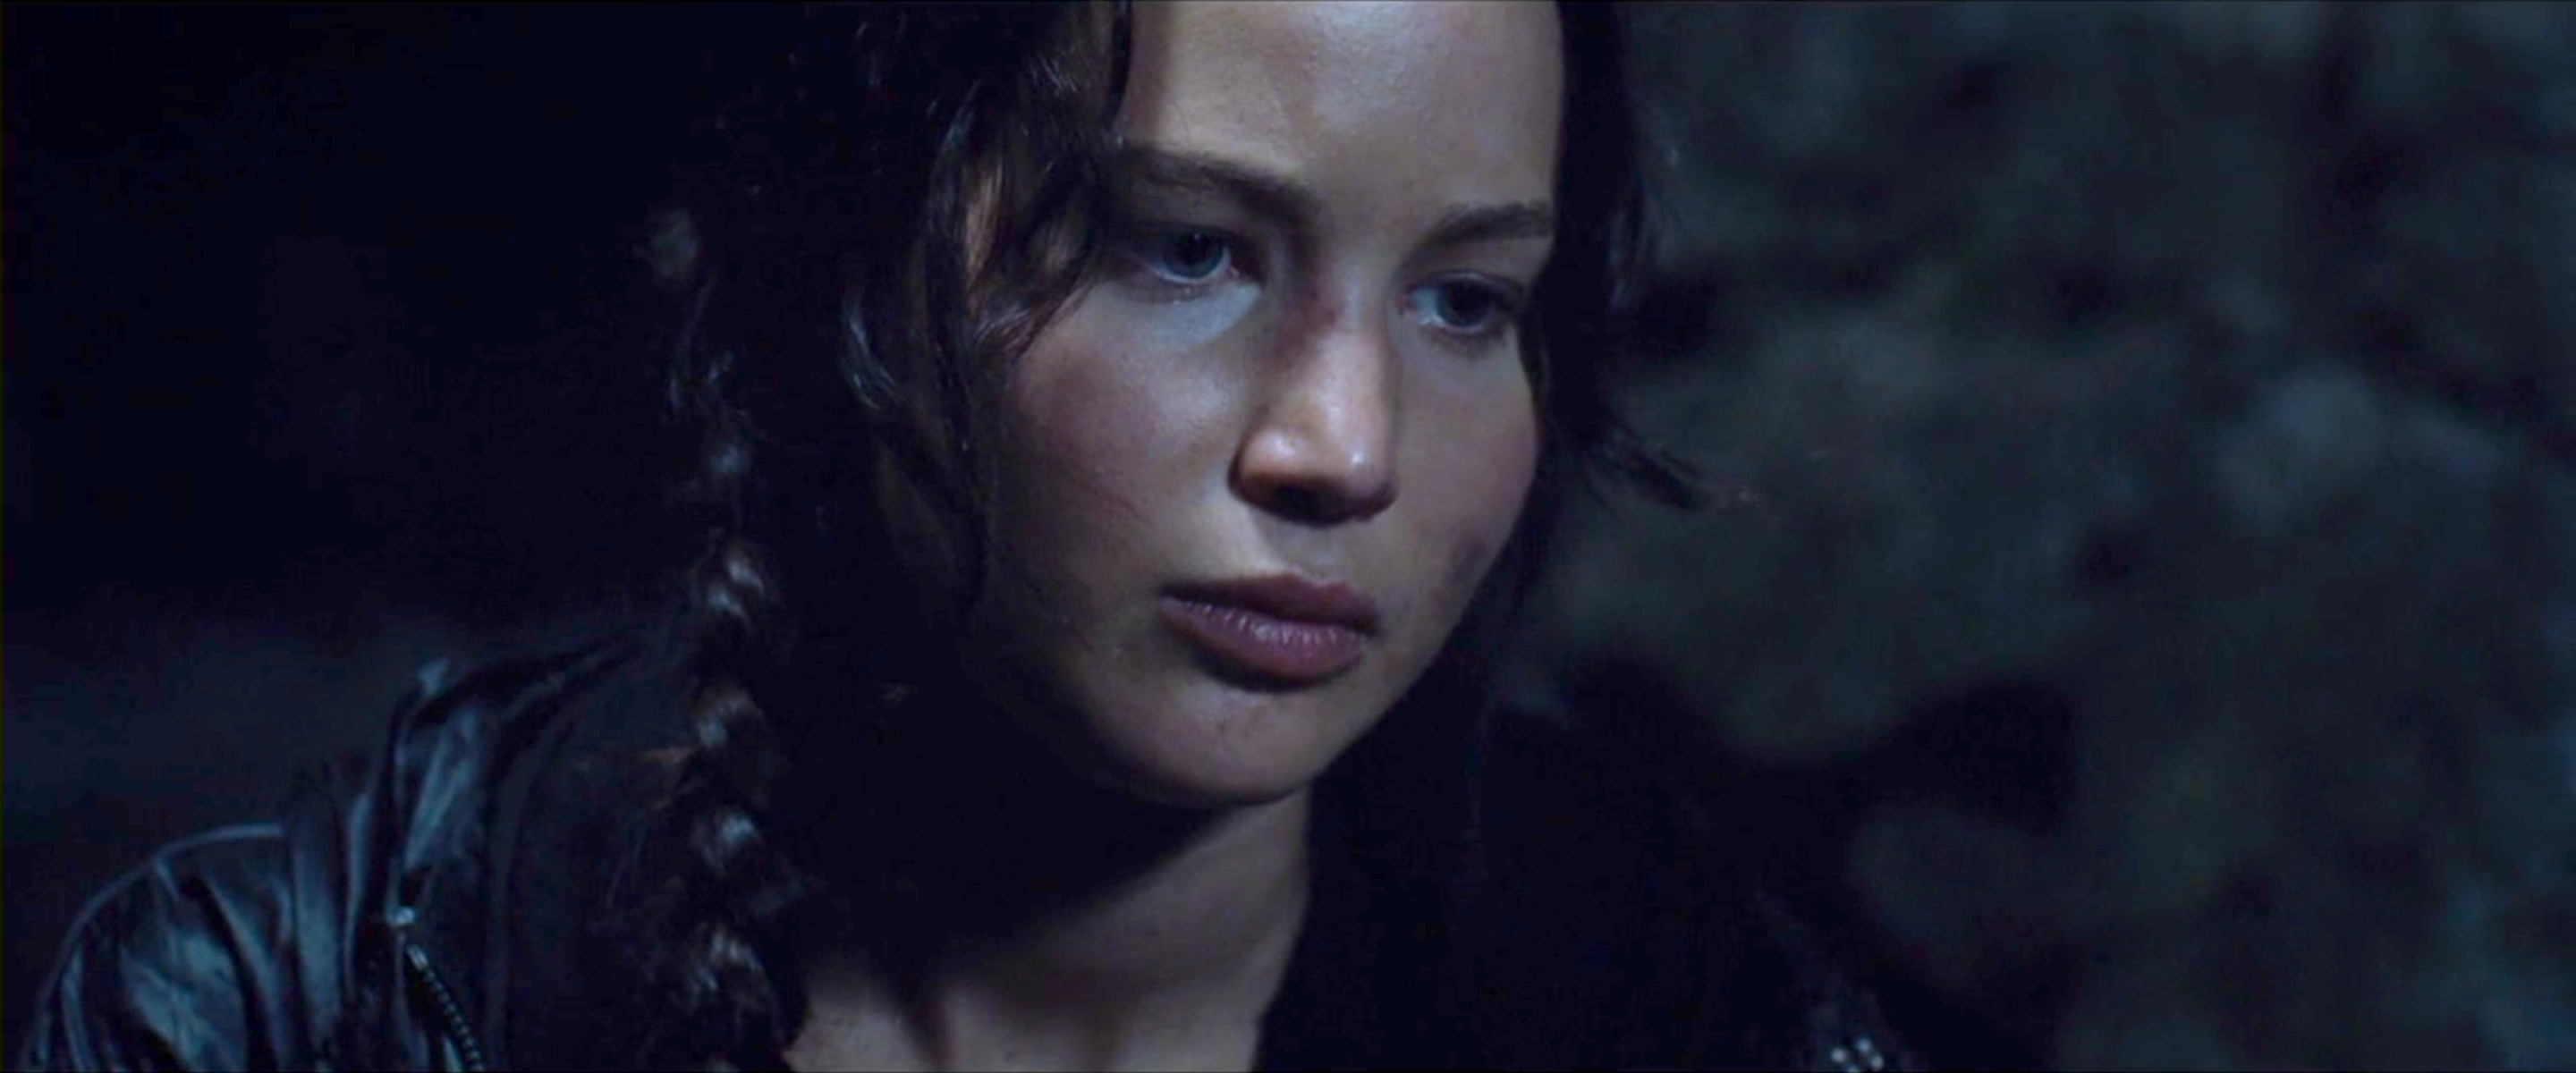 Katniss with visible foundation and blush